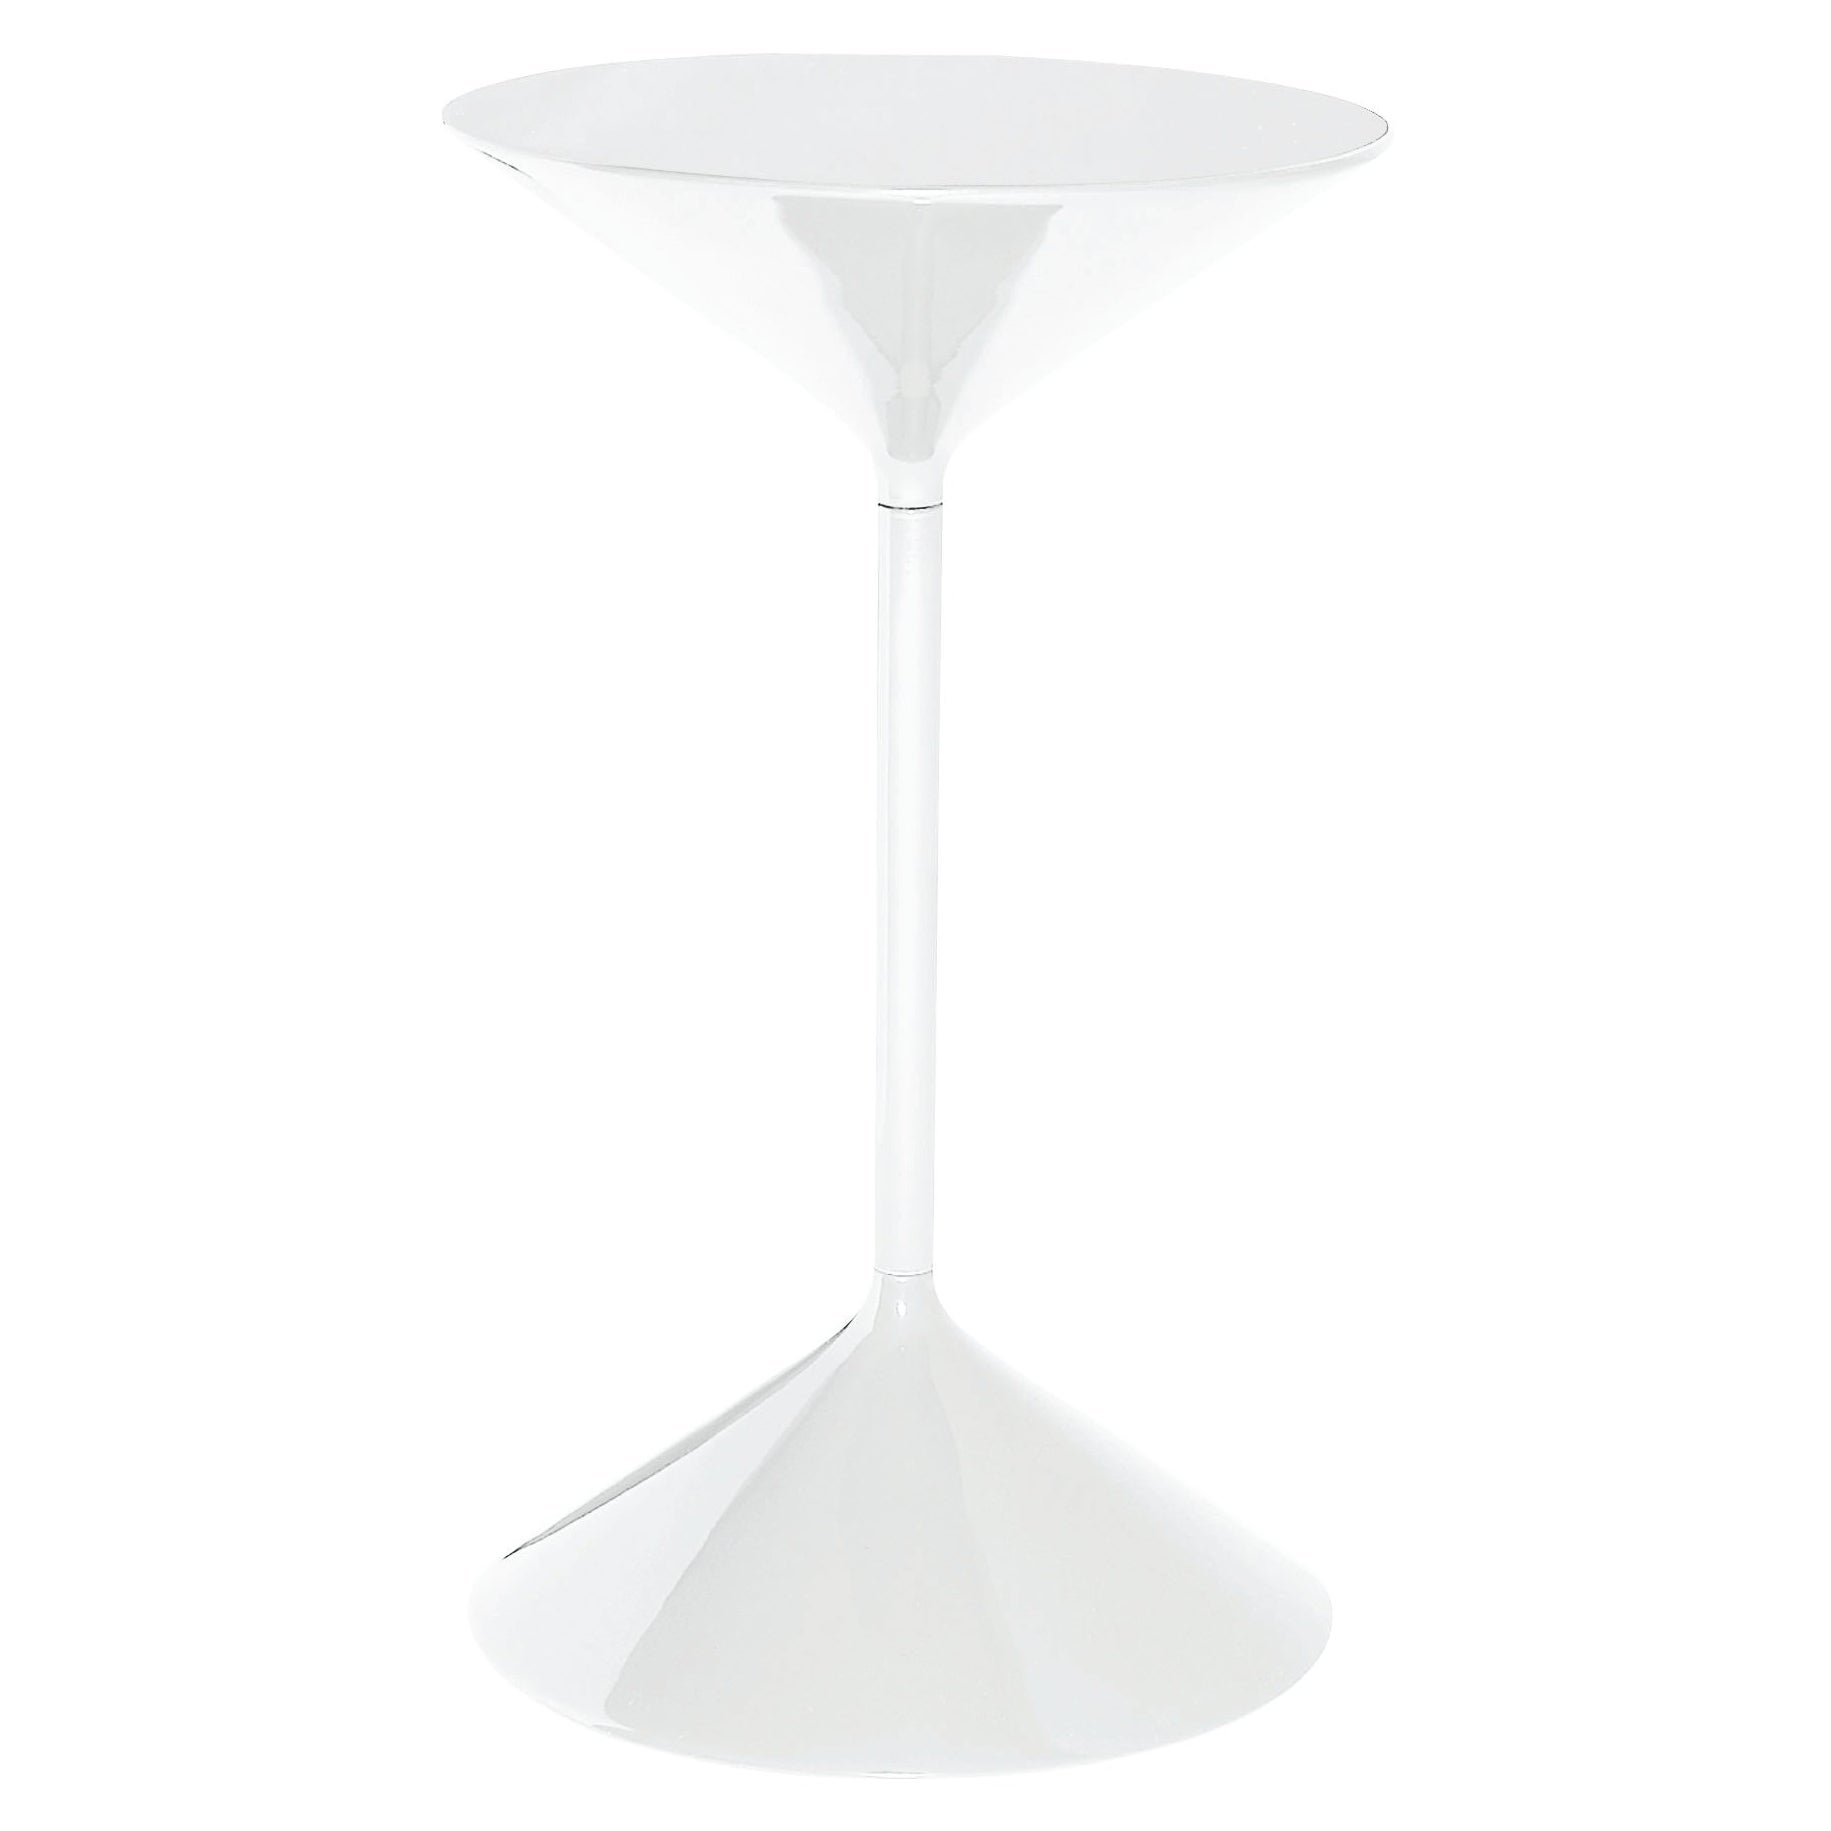 Zanotta Tempo Large Table in White Finish with Lacquered Top by Prospero Rasulo